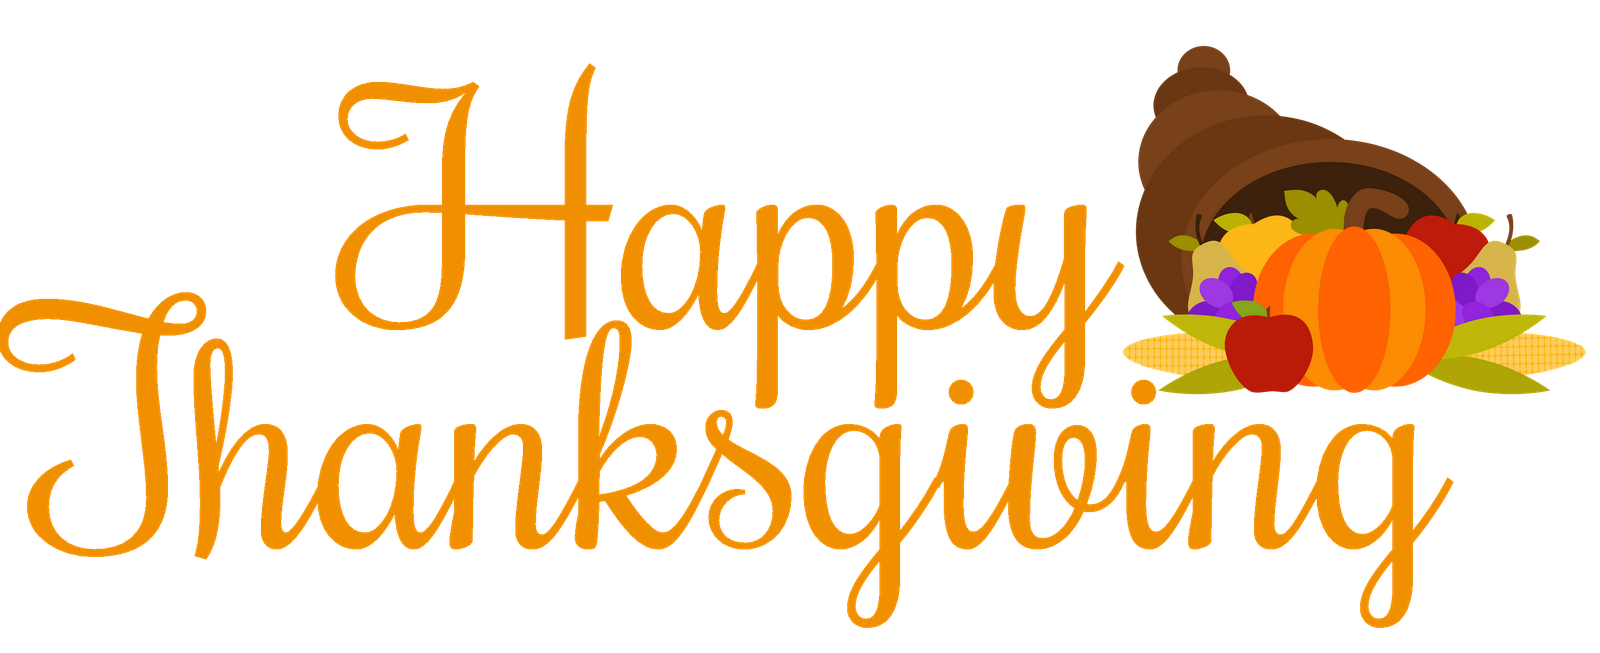 NTCC /uploads/2016/11/the-twinery-happy-thanksgiving-and-weekend-sale-announcement-oeFYgD-clipart.png